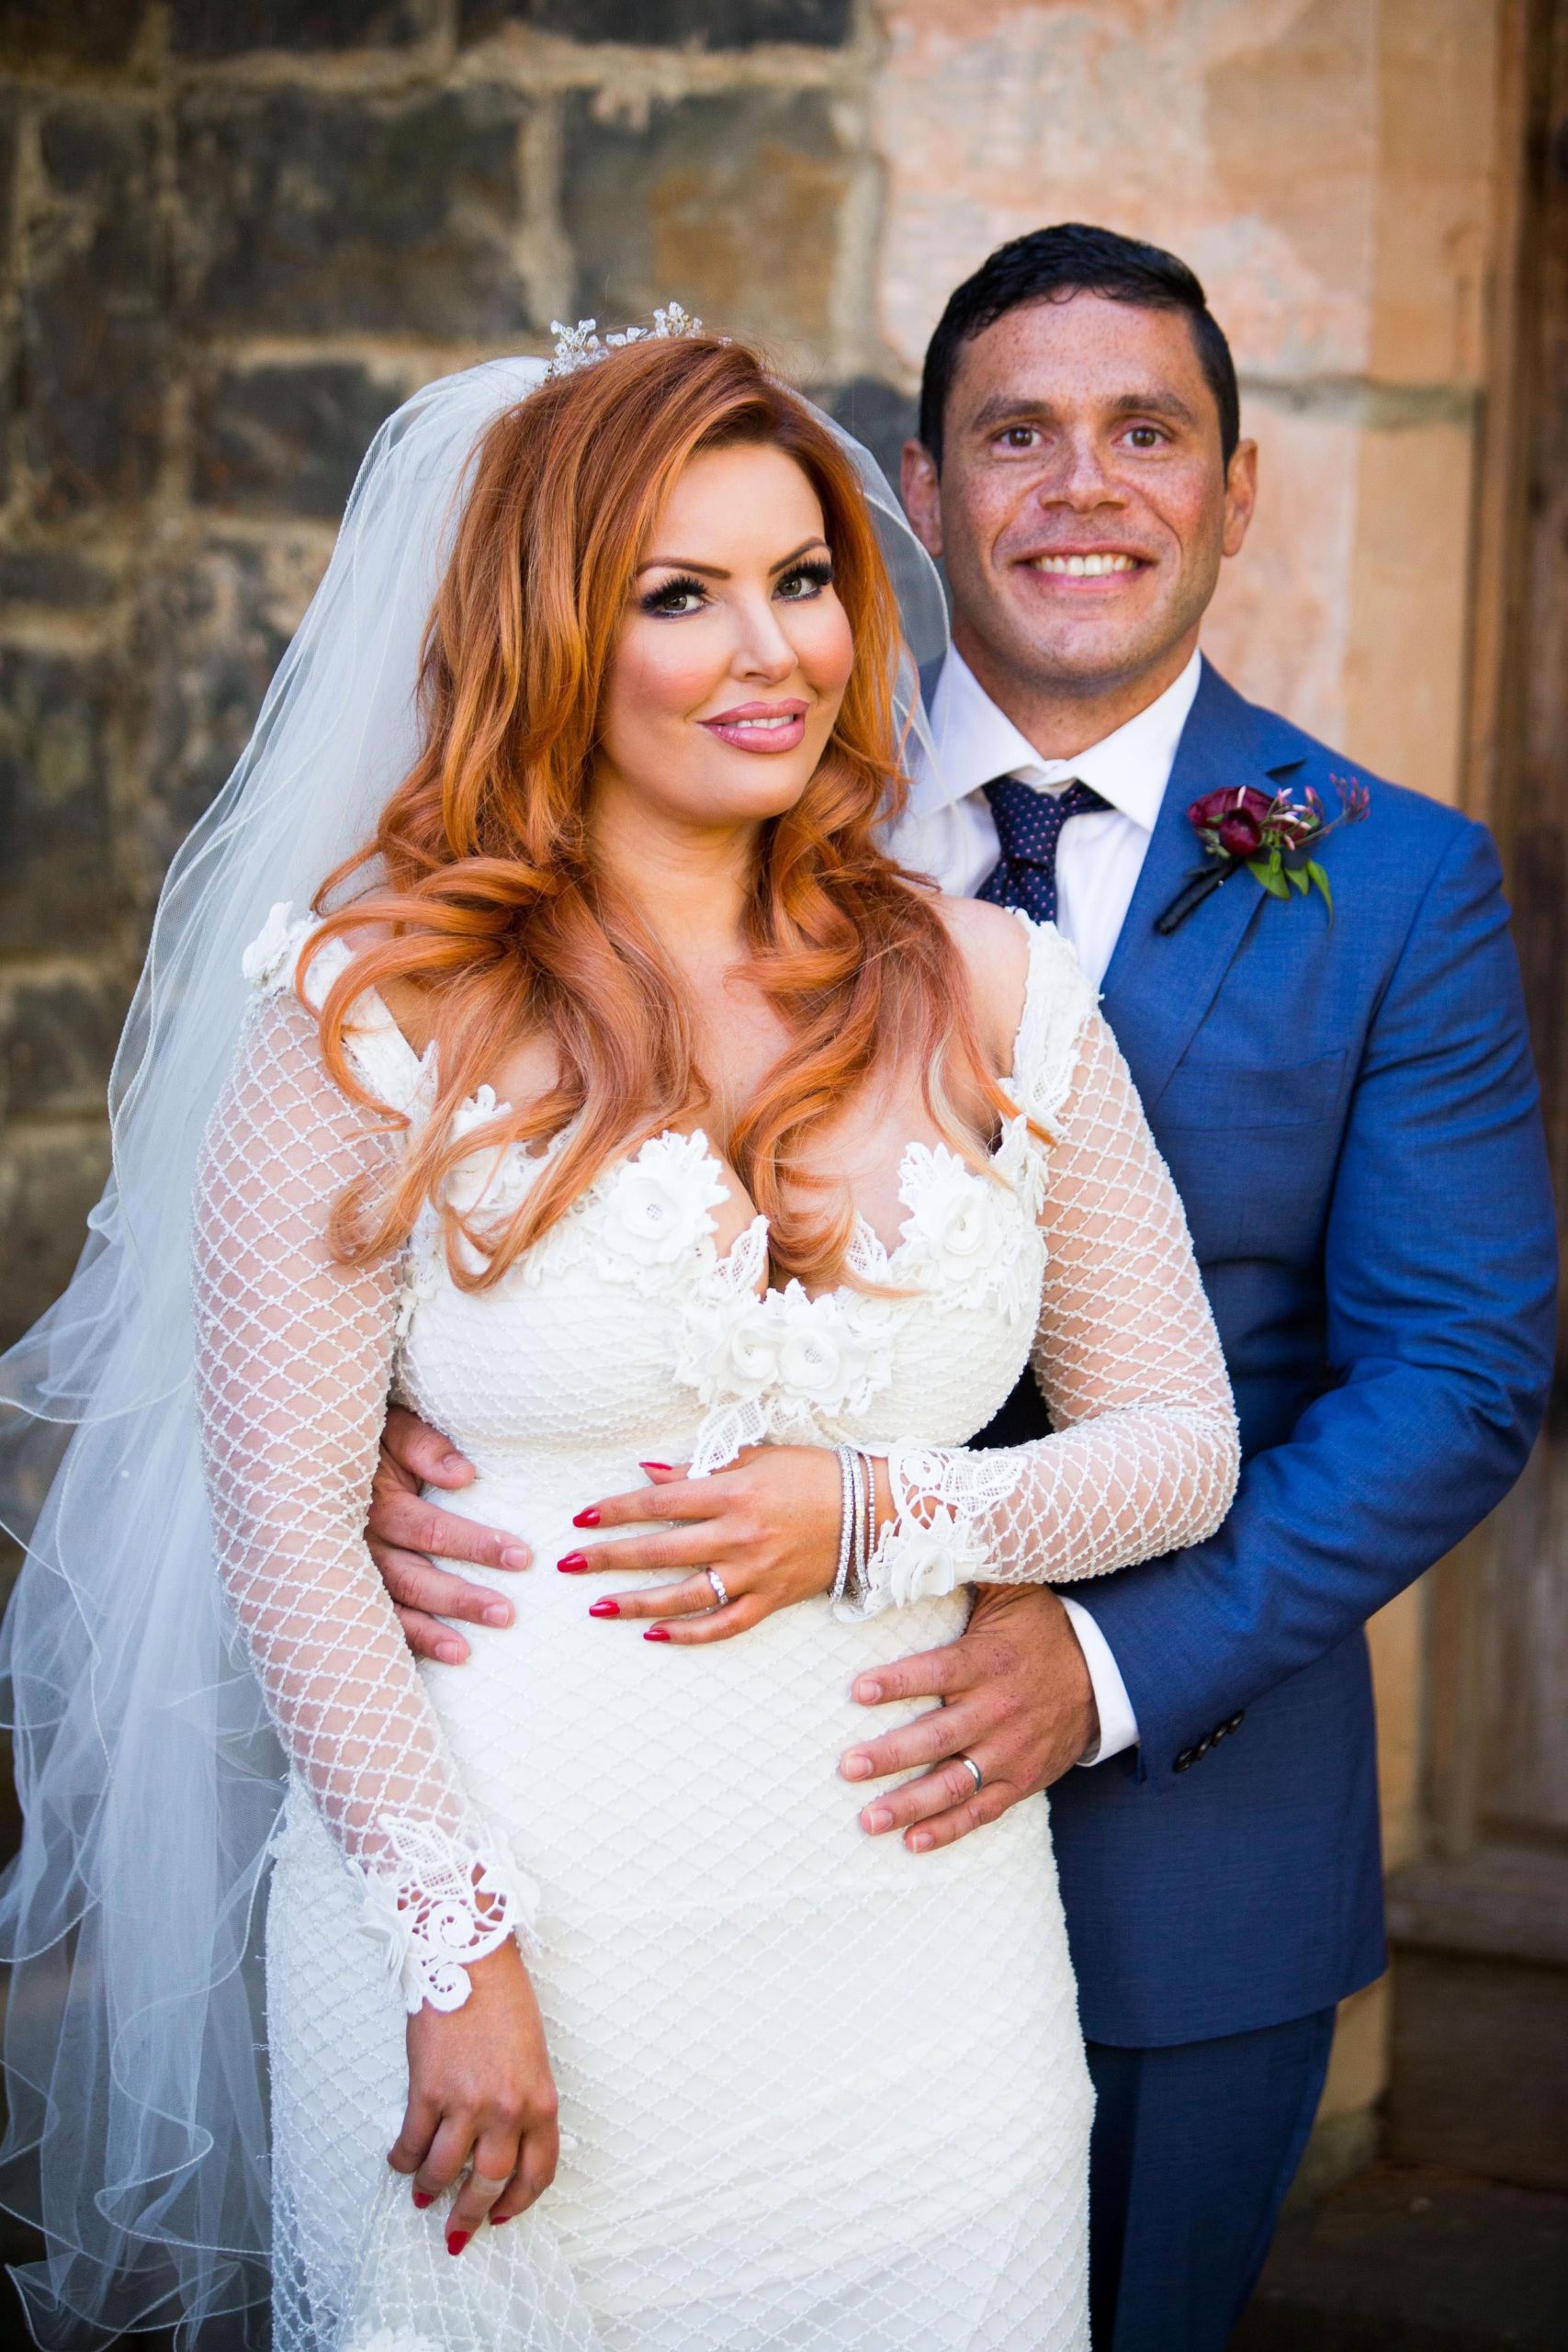 Married At First Sight Australia Couples- Where Are They Now?